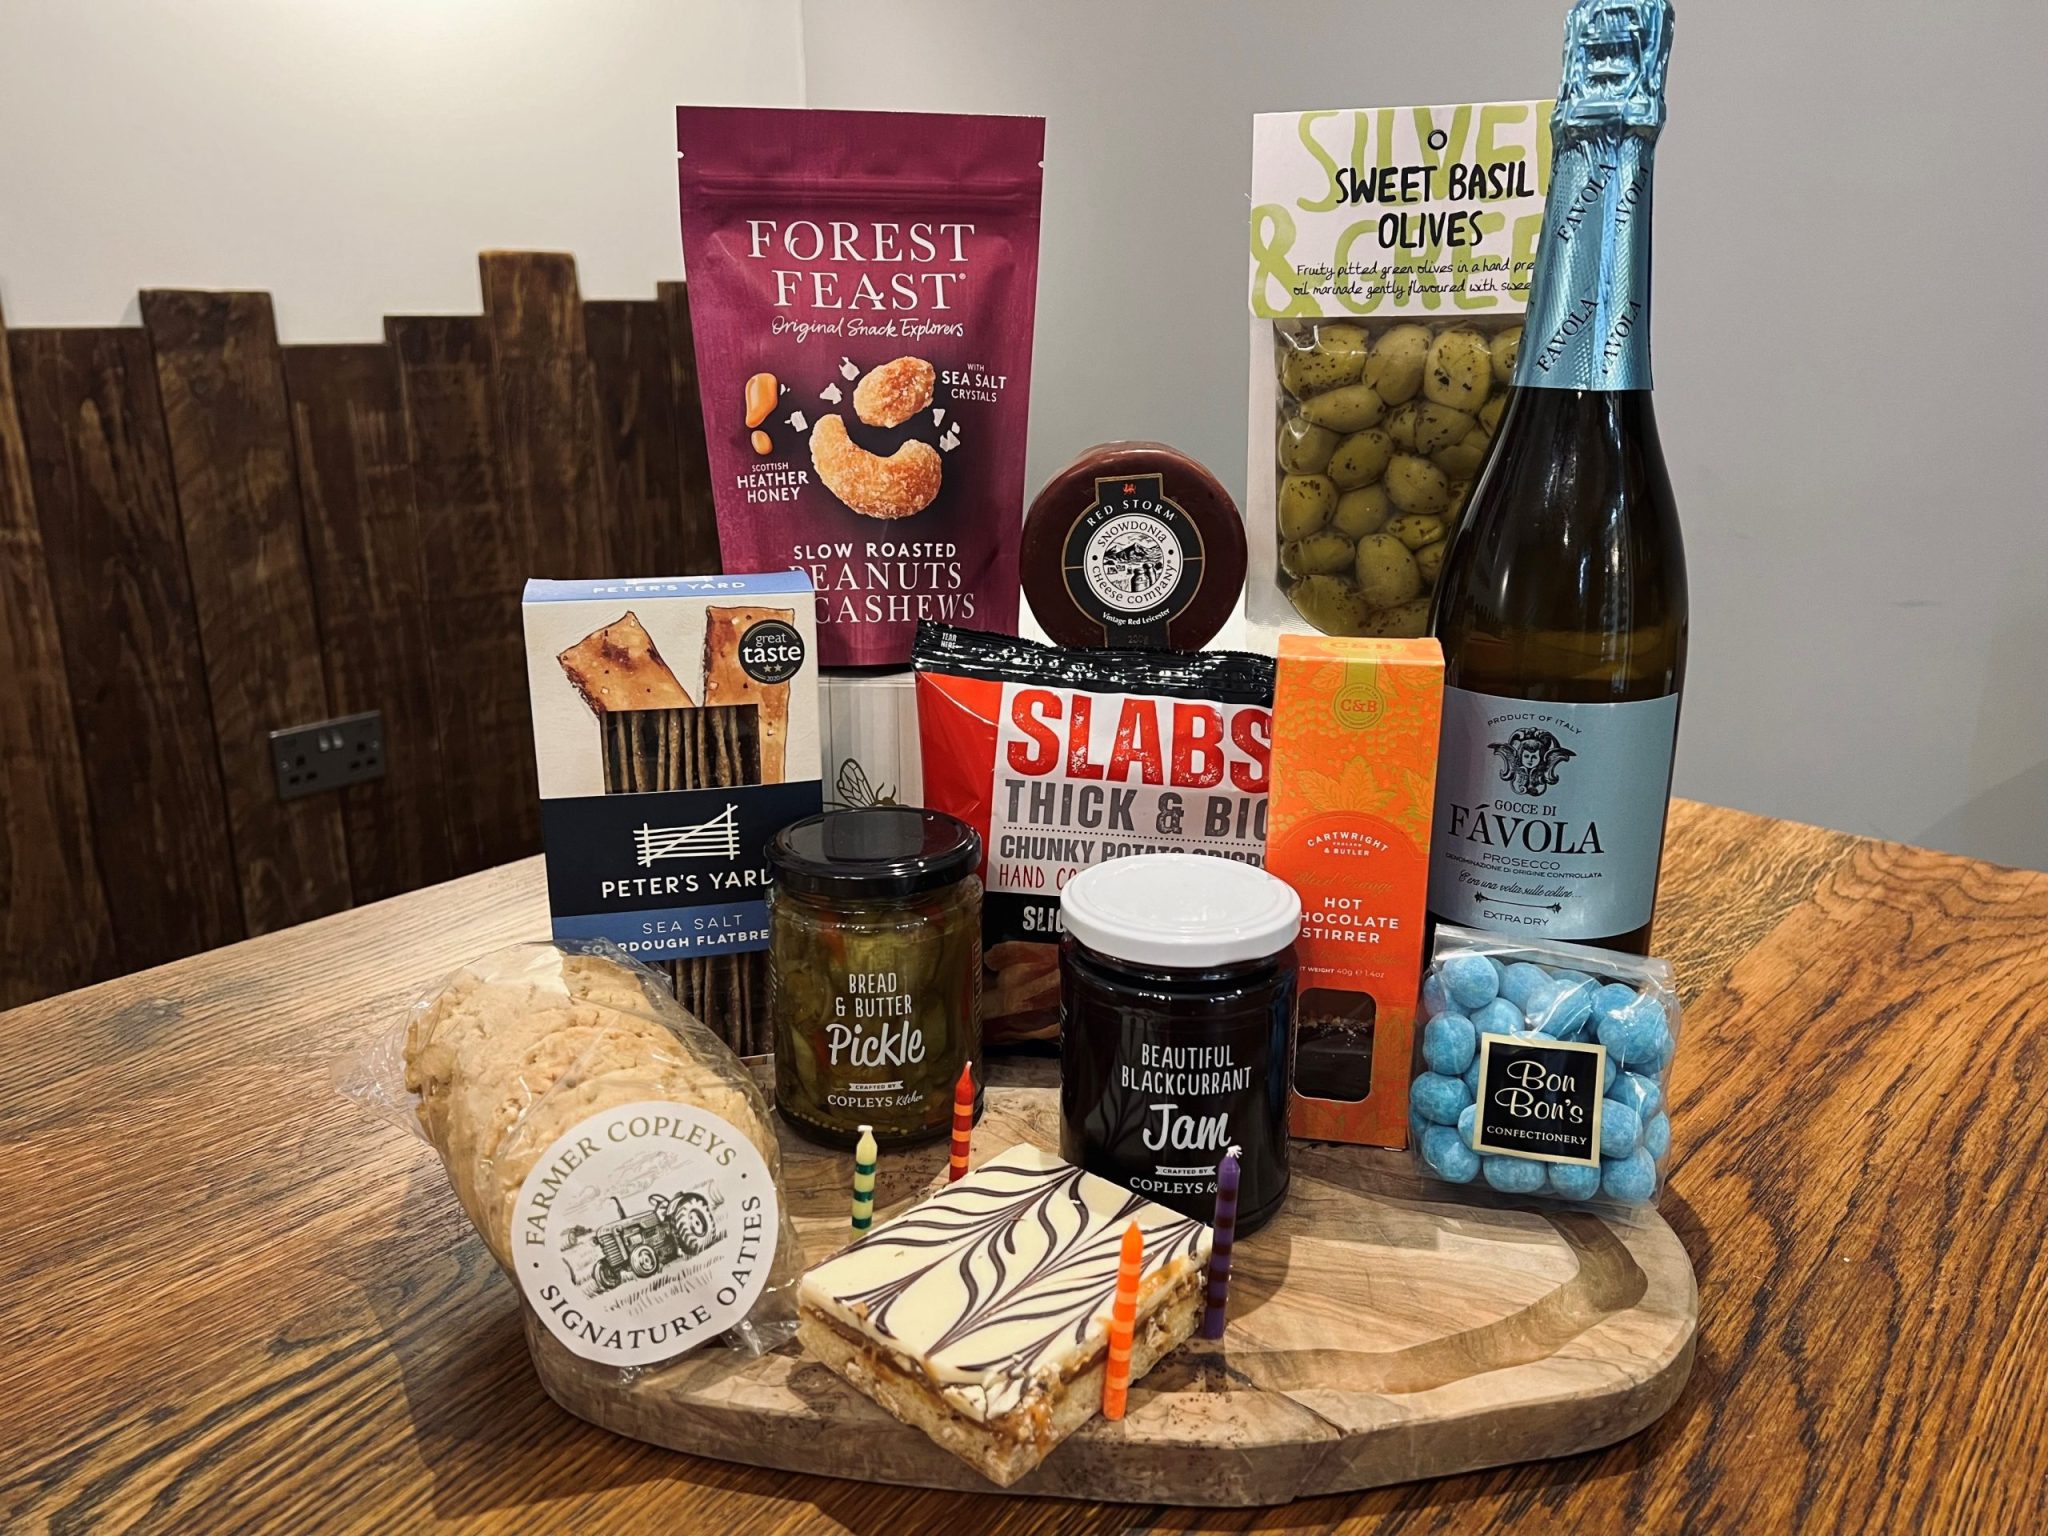 Products included in birthday prosecco hamper